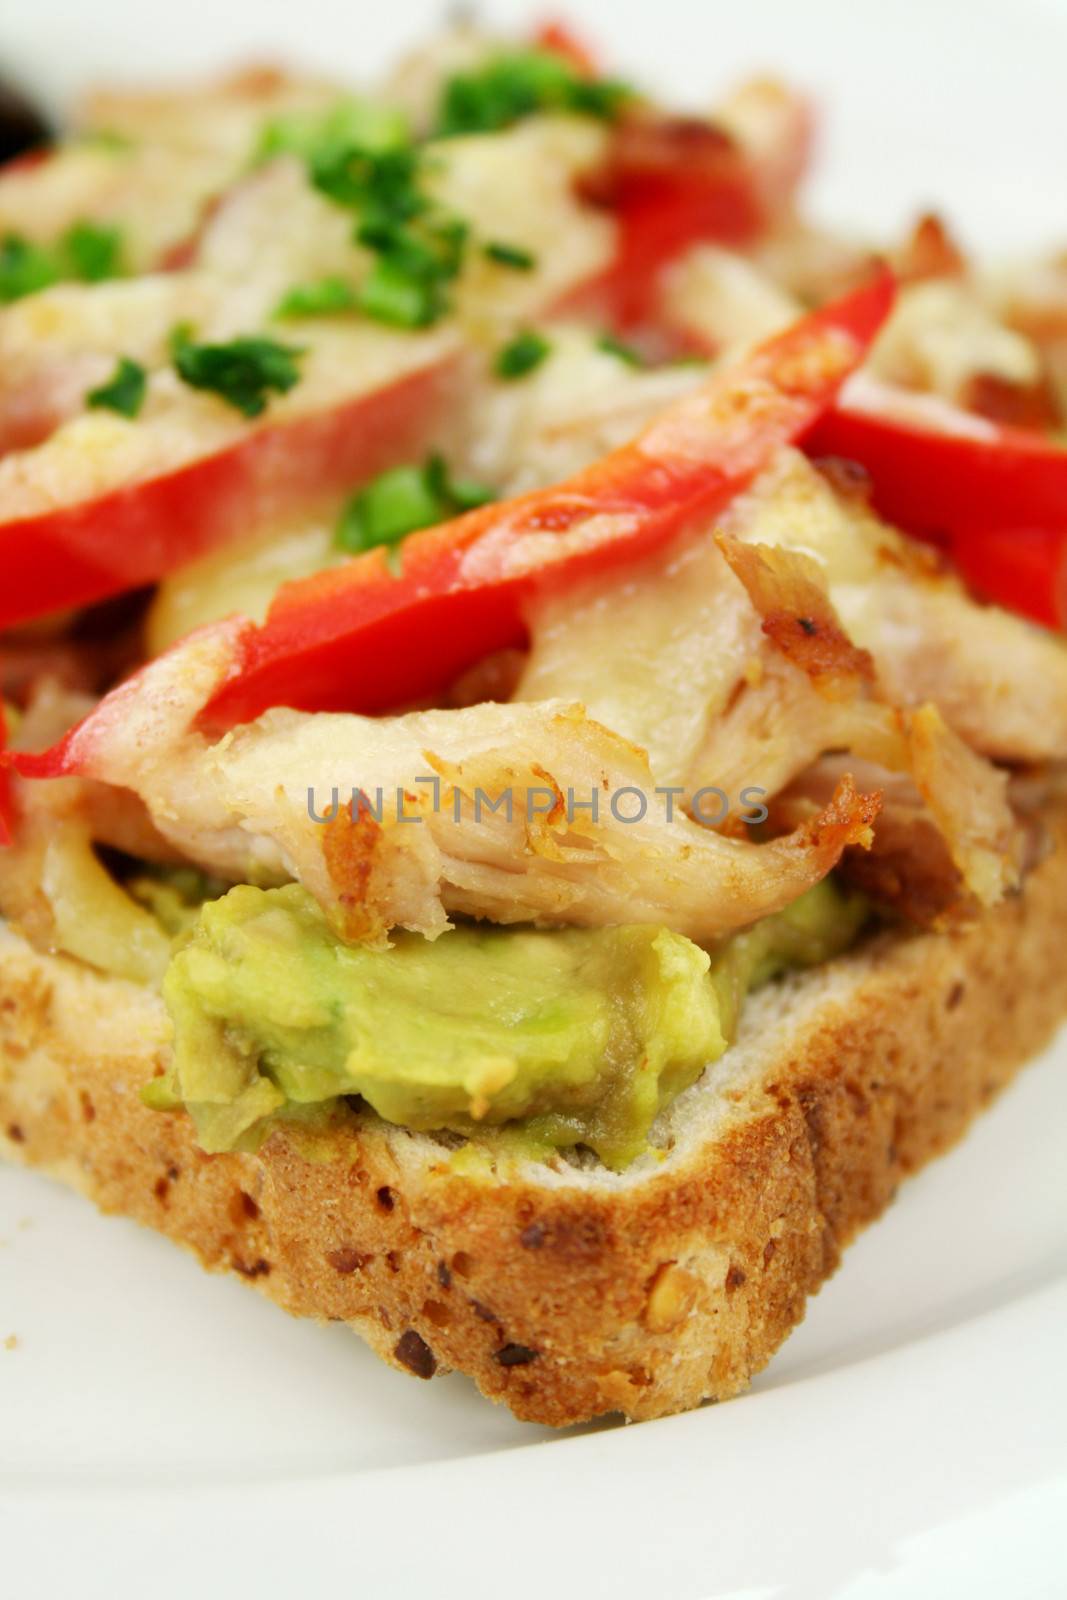 Grilled open chicken sandwich with avocado, peppers and cheese with a side salad.